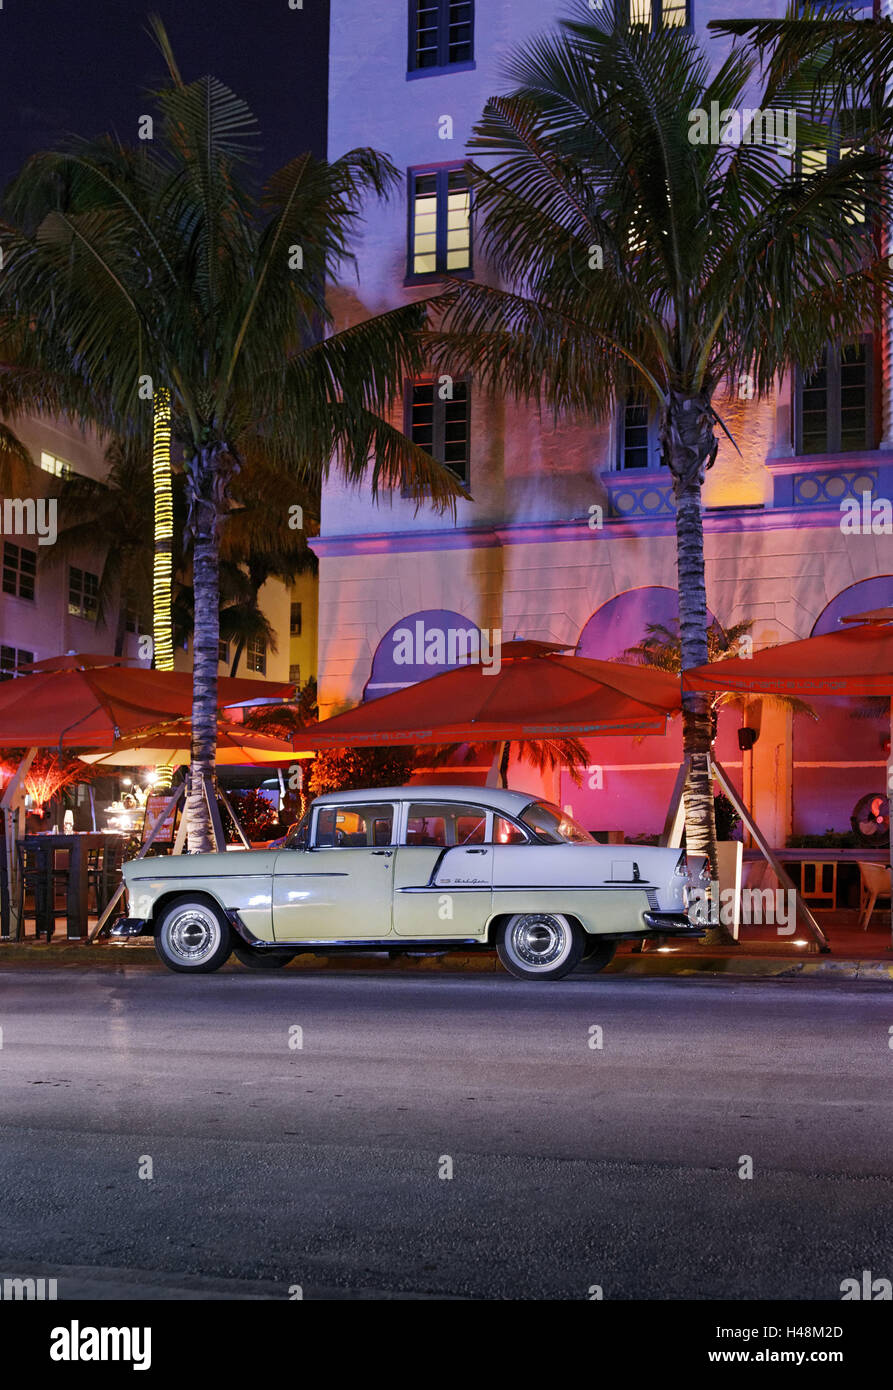 Chevrolet Bel Air, year of manufacture 1957, the fifties, American vintage car, Ocean Drive, Miami South Beach, Art Deco District, Florida, USA, Stock Photo